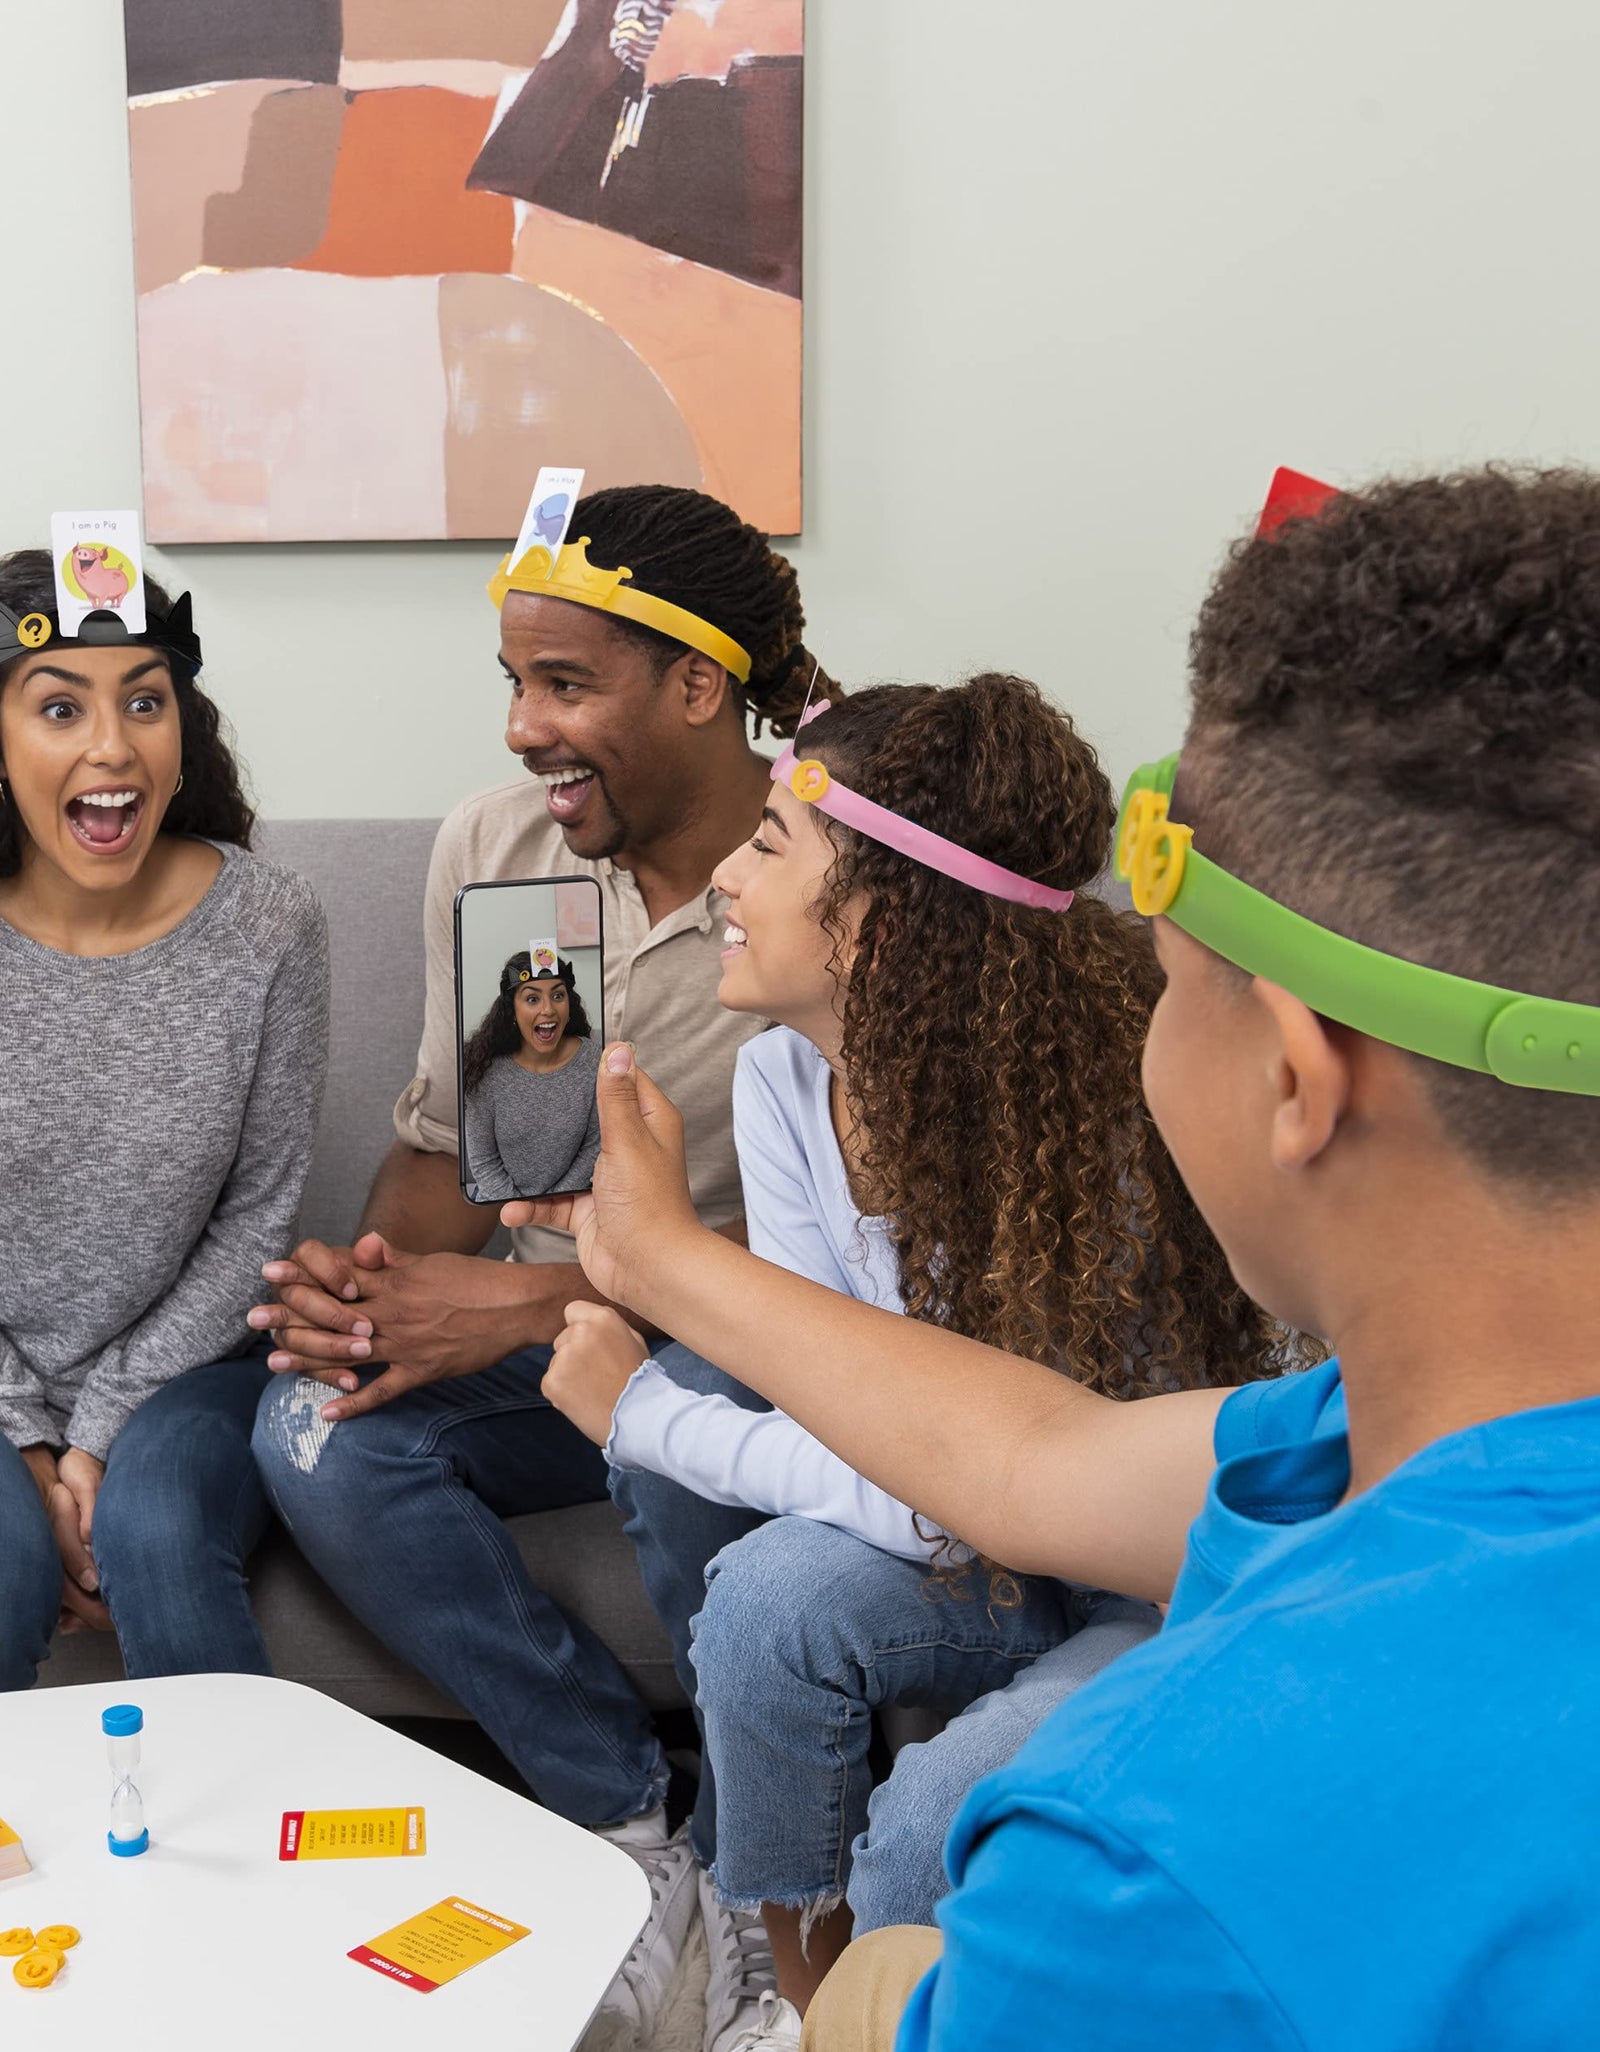 Spin Master Hedbanz Picture Guessing Board Game New Edition, for Families and Kids Ages 8 and up